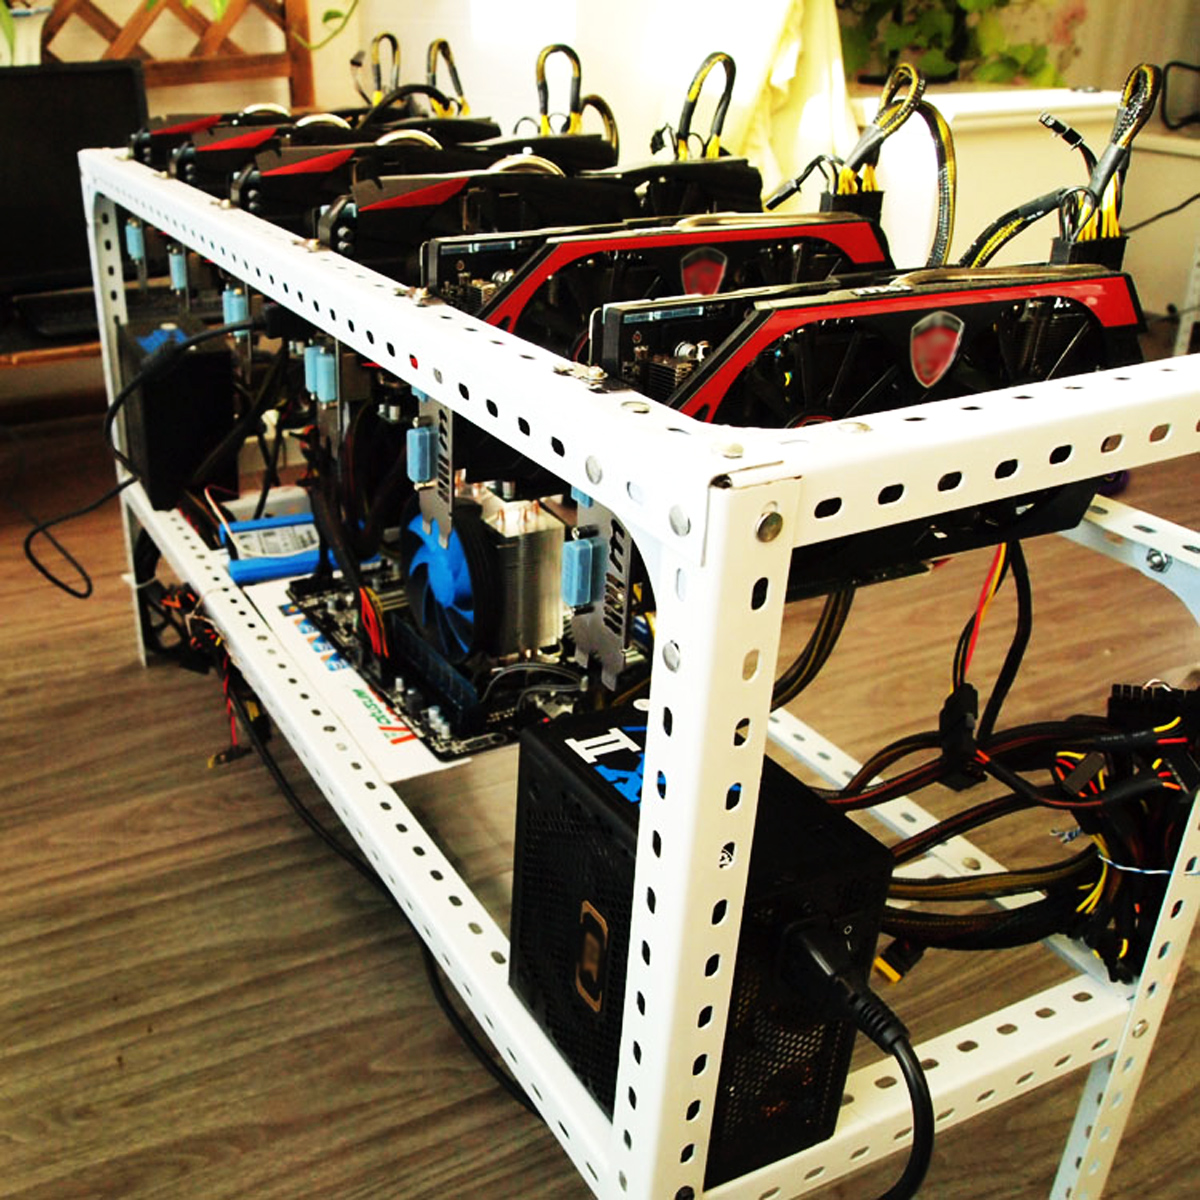 Steel-Crypto-Coin-Open-Air-Mining-Frame-Rig-Case-For-46-GPU-ETH-BTC-Ethereum-1245658